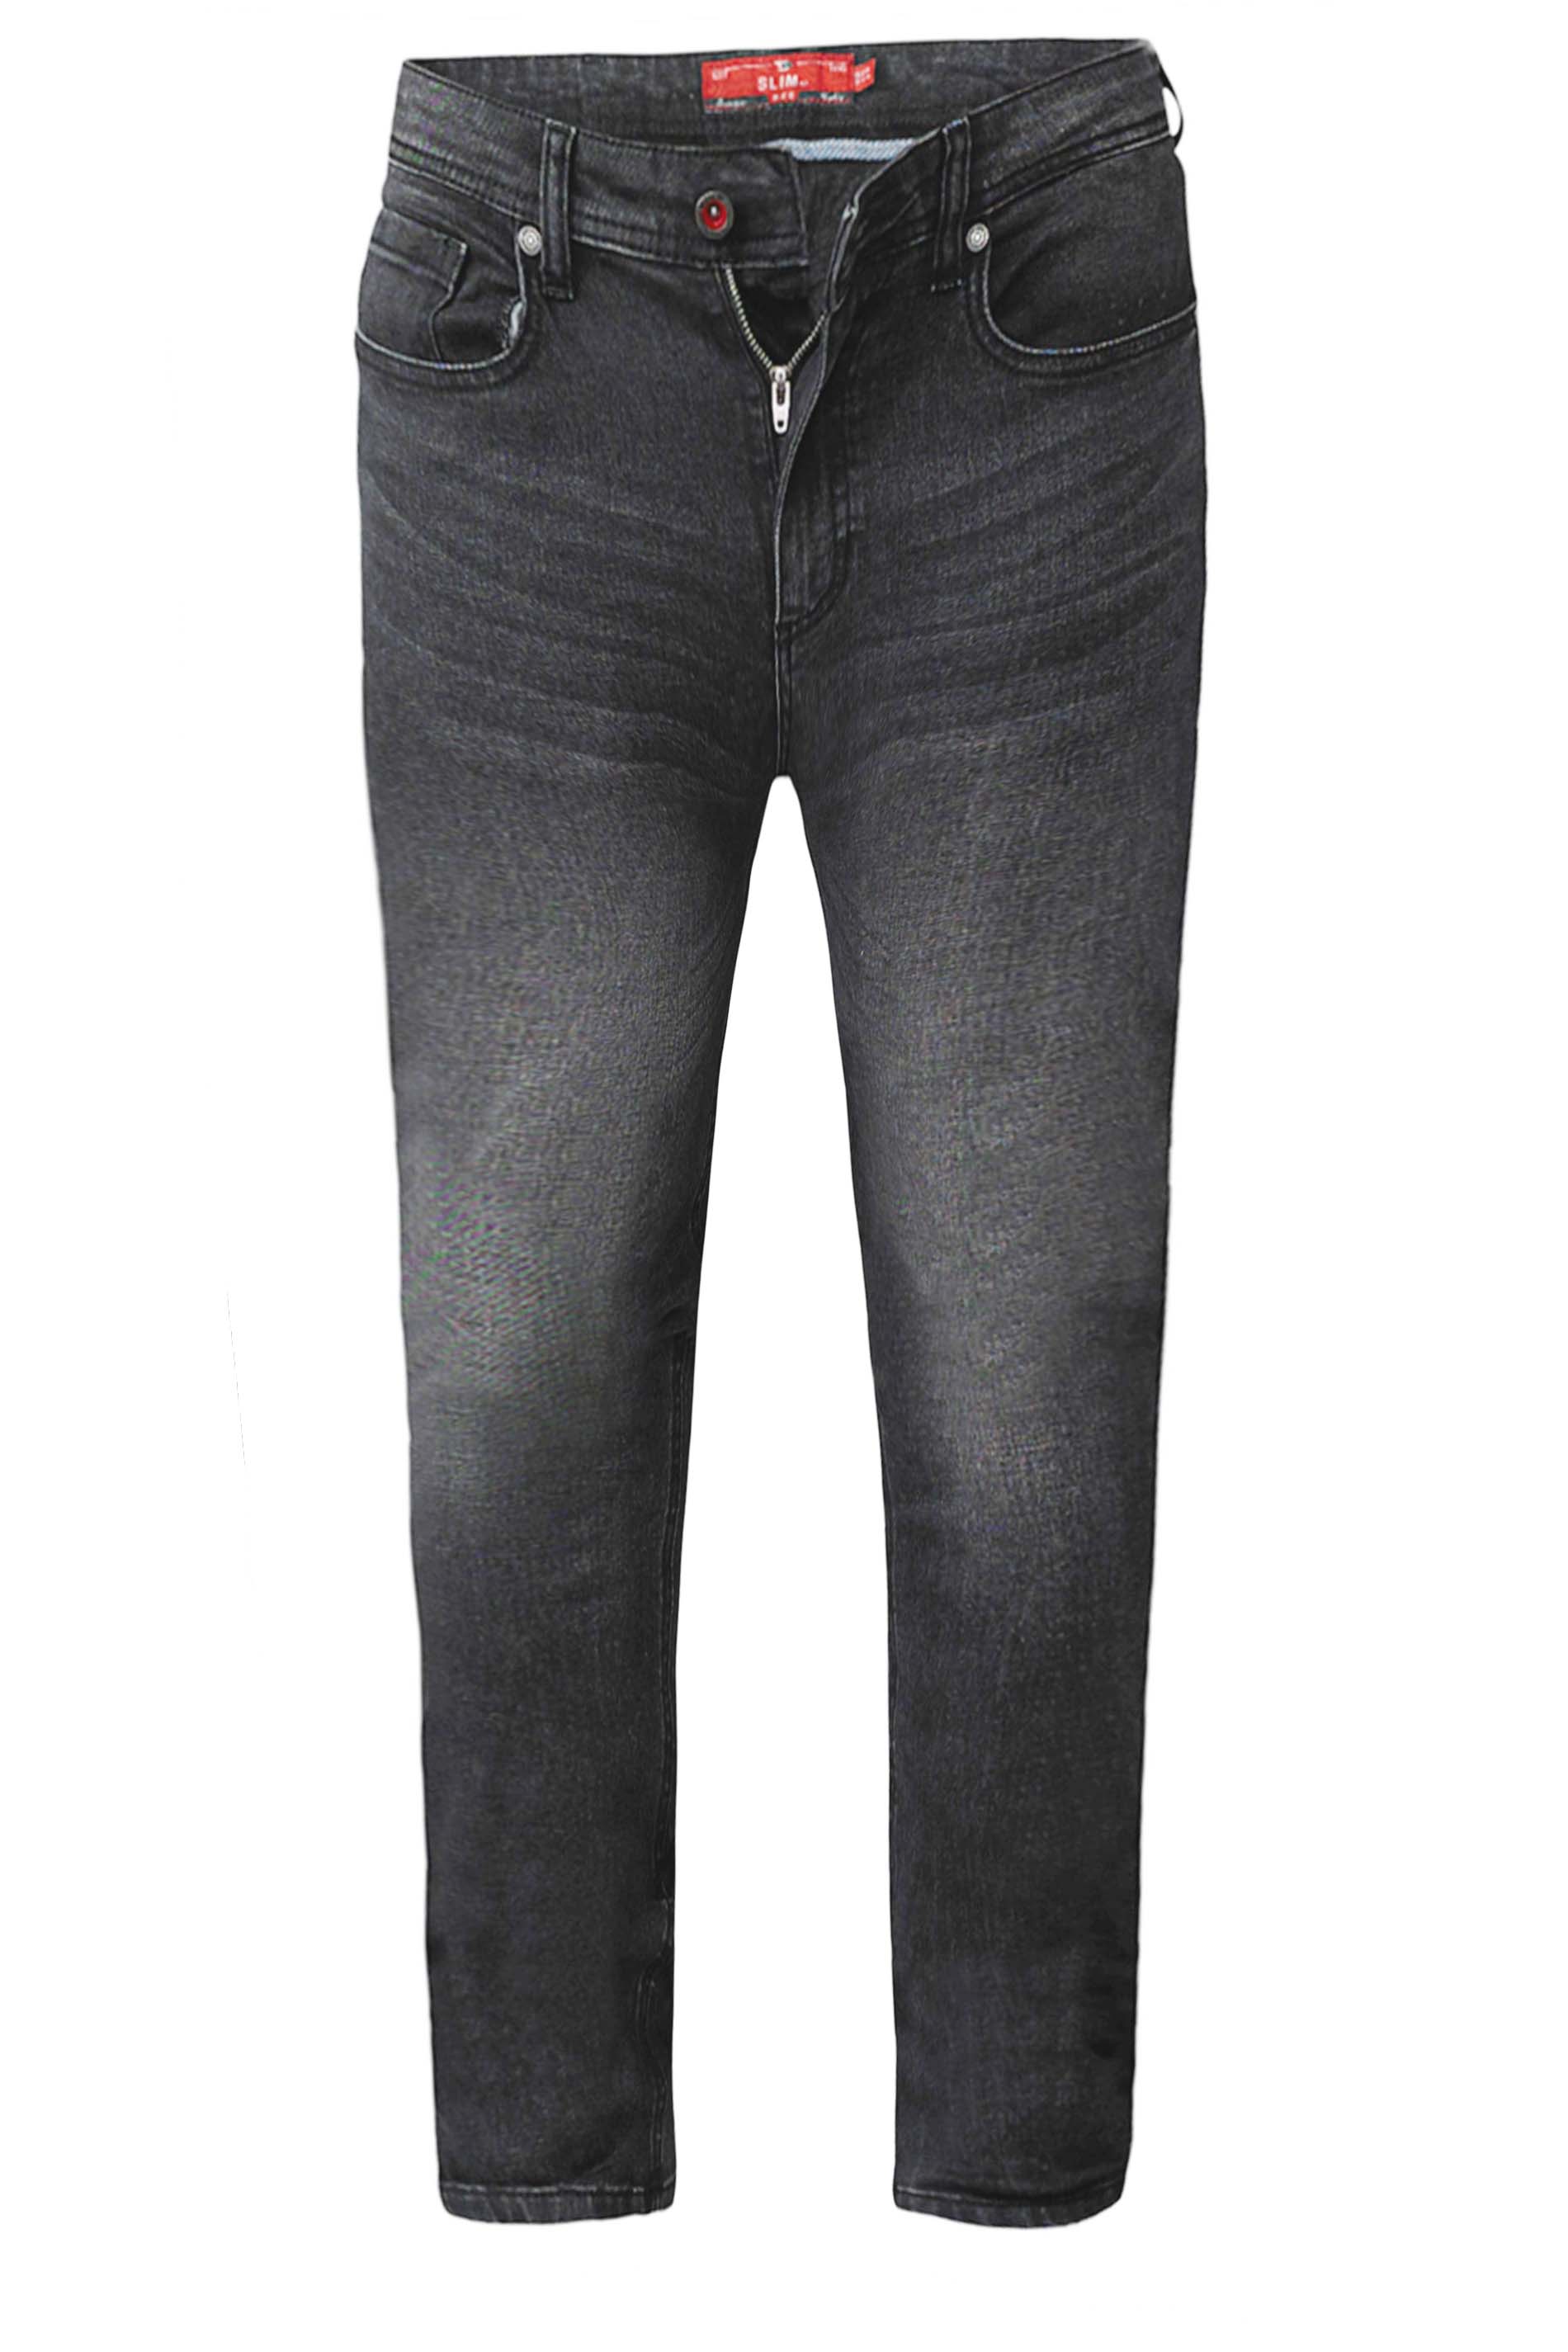 D555 Grey Tapered Stretch Jeans | BadRhino 3